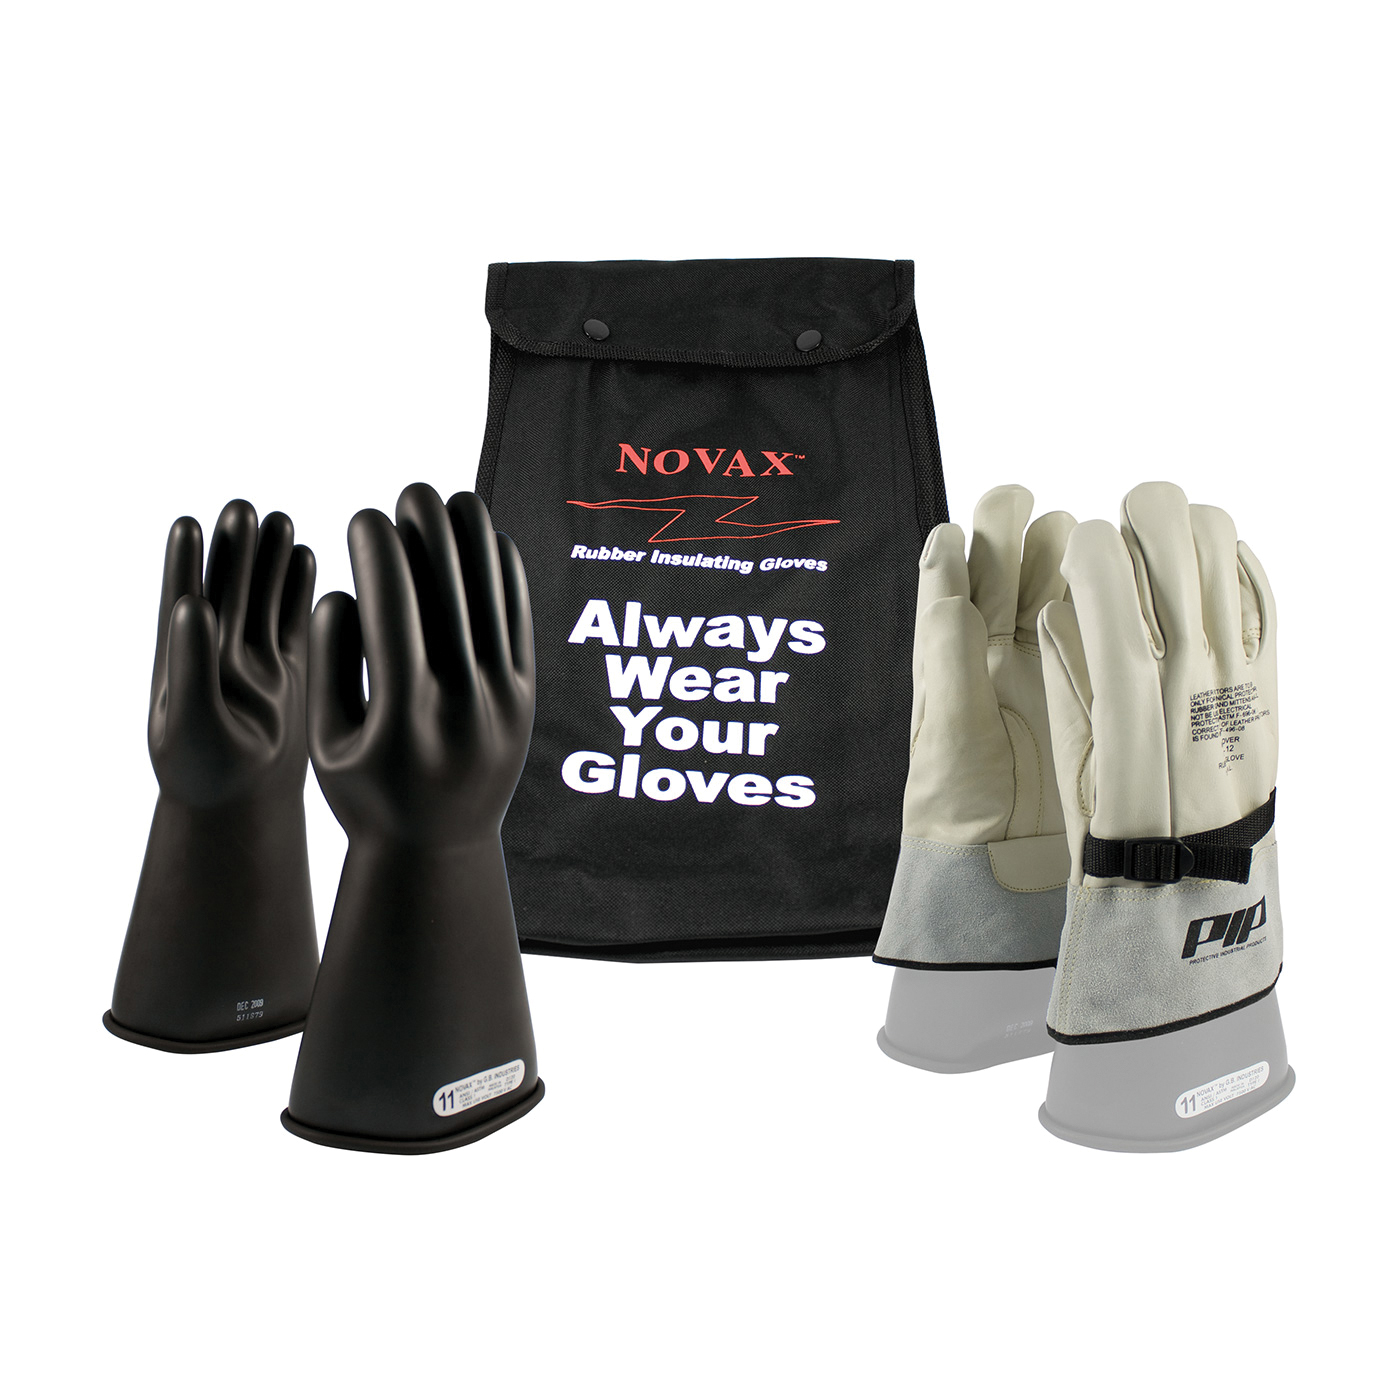 Novax® 150-SK-1/11-KIT Insulating Unisex Electrical Safety Gloves Kit, SZ 11, Cowhide Leather/Natural Rubber, Black/Natural, 14 in L, ASTM Class: Class 1, 7500 VAC, 11250 VDC Max Use Voltage